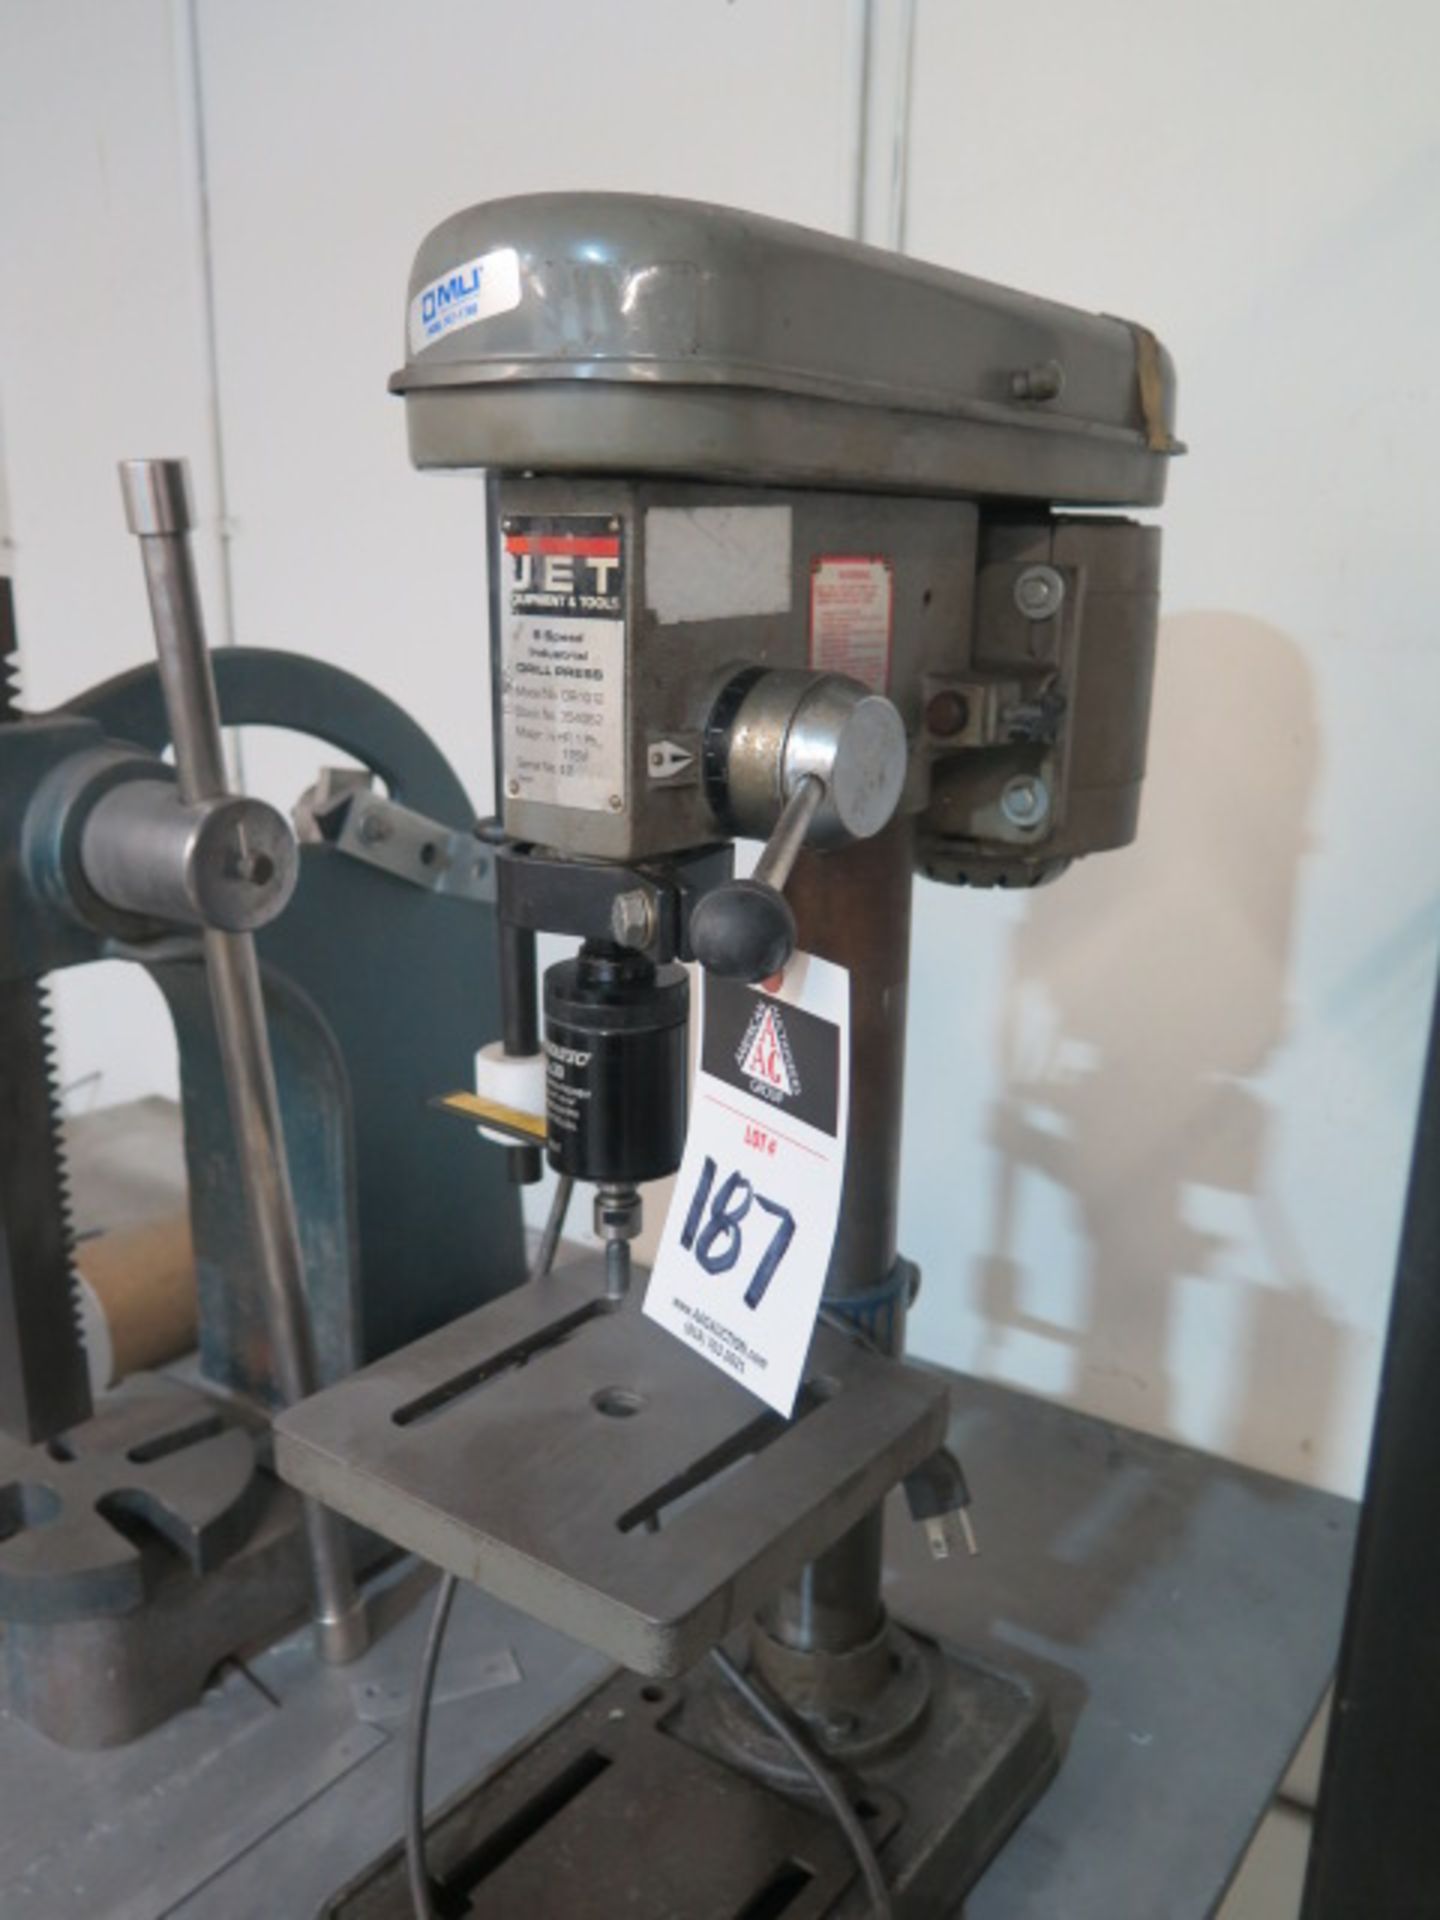 Jet Table Model 5-Speed Drill Press w/ Tapmatic Rx30 Tapping Head - Image 2 of 4